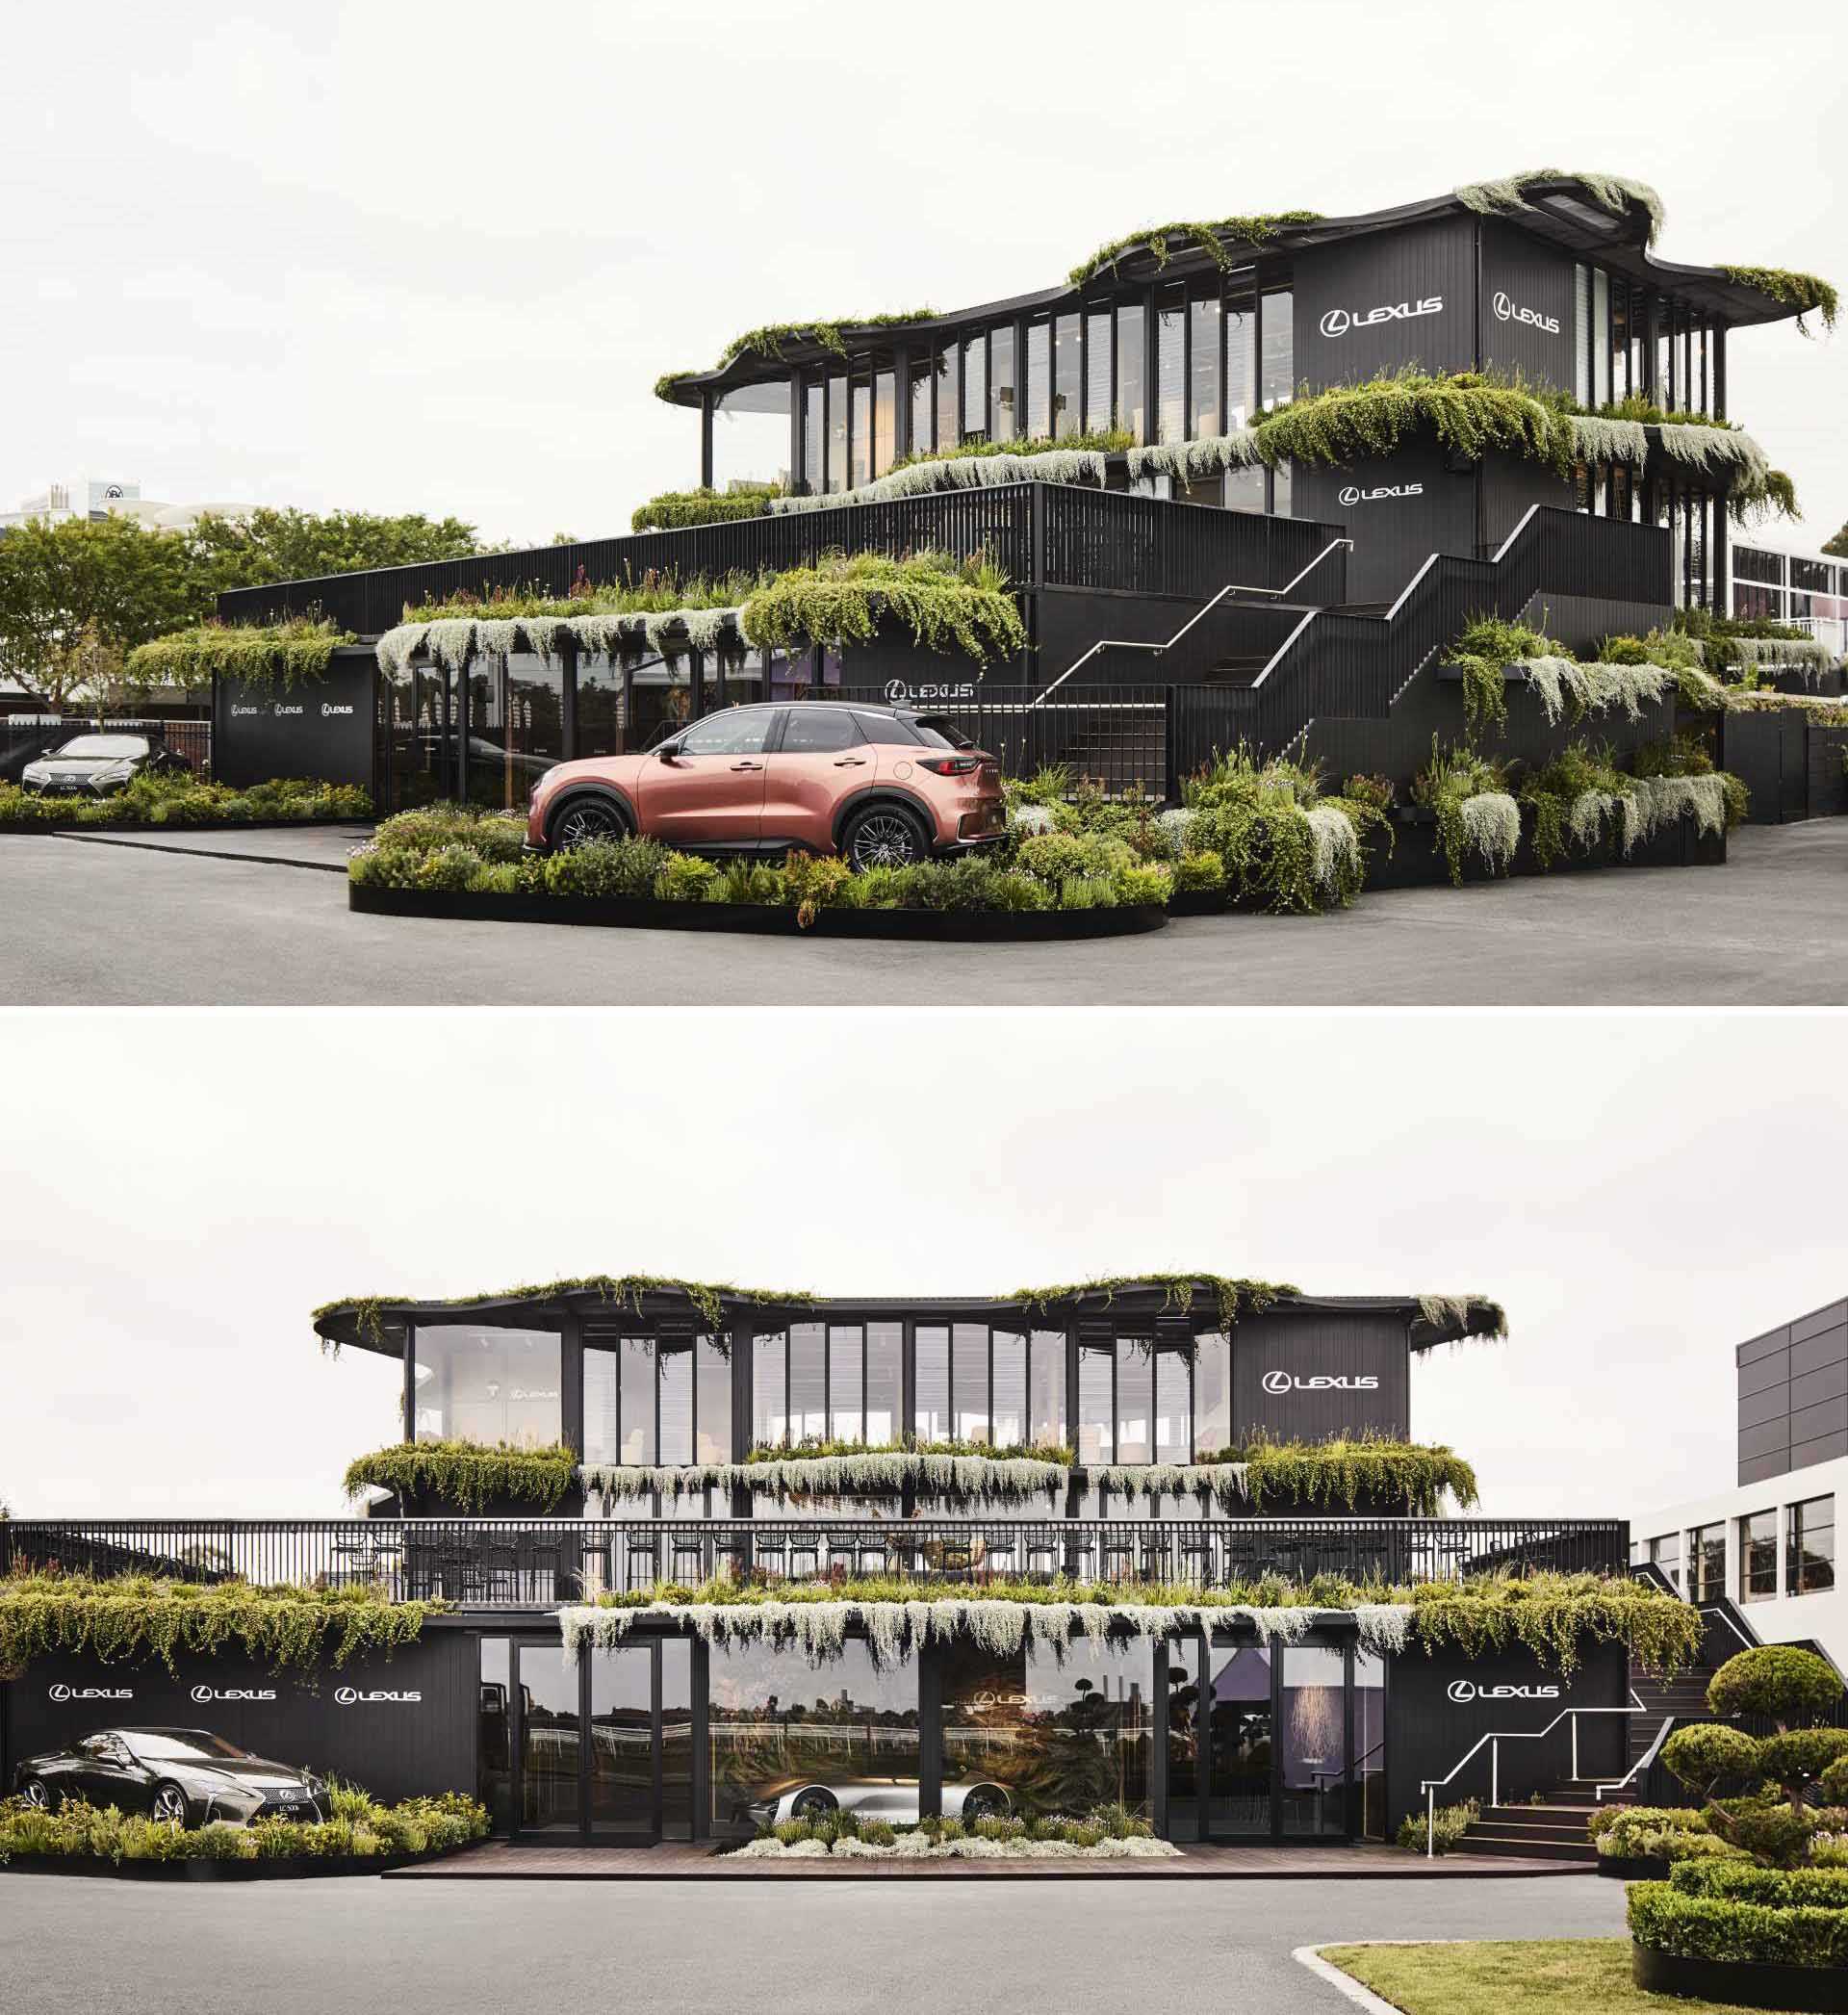 Drawing inspiration from the Australian landscape, Koichi Takada Architects designed a three-storey modular building that has over 1,000 native Australian plants and flowers on its facade.